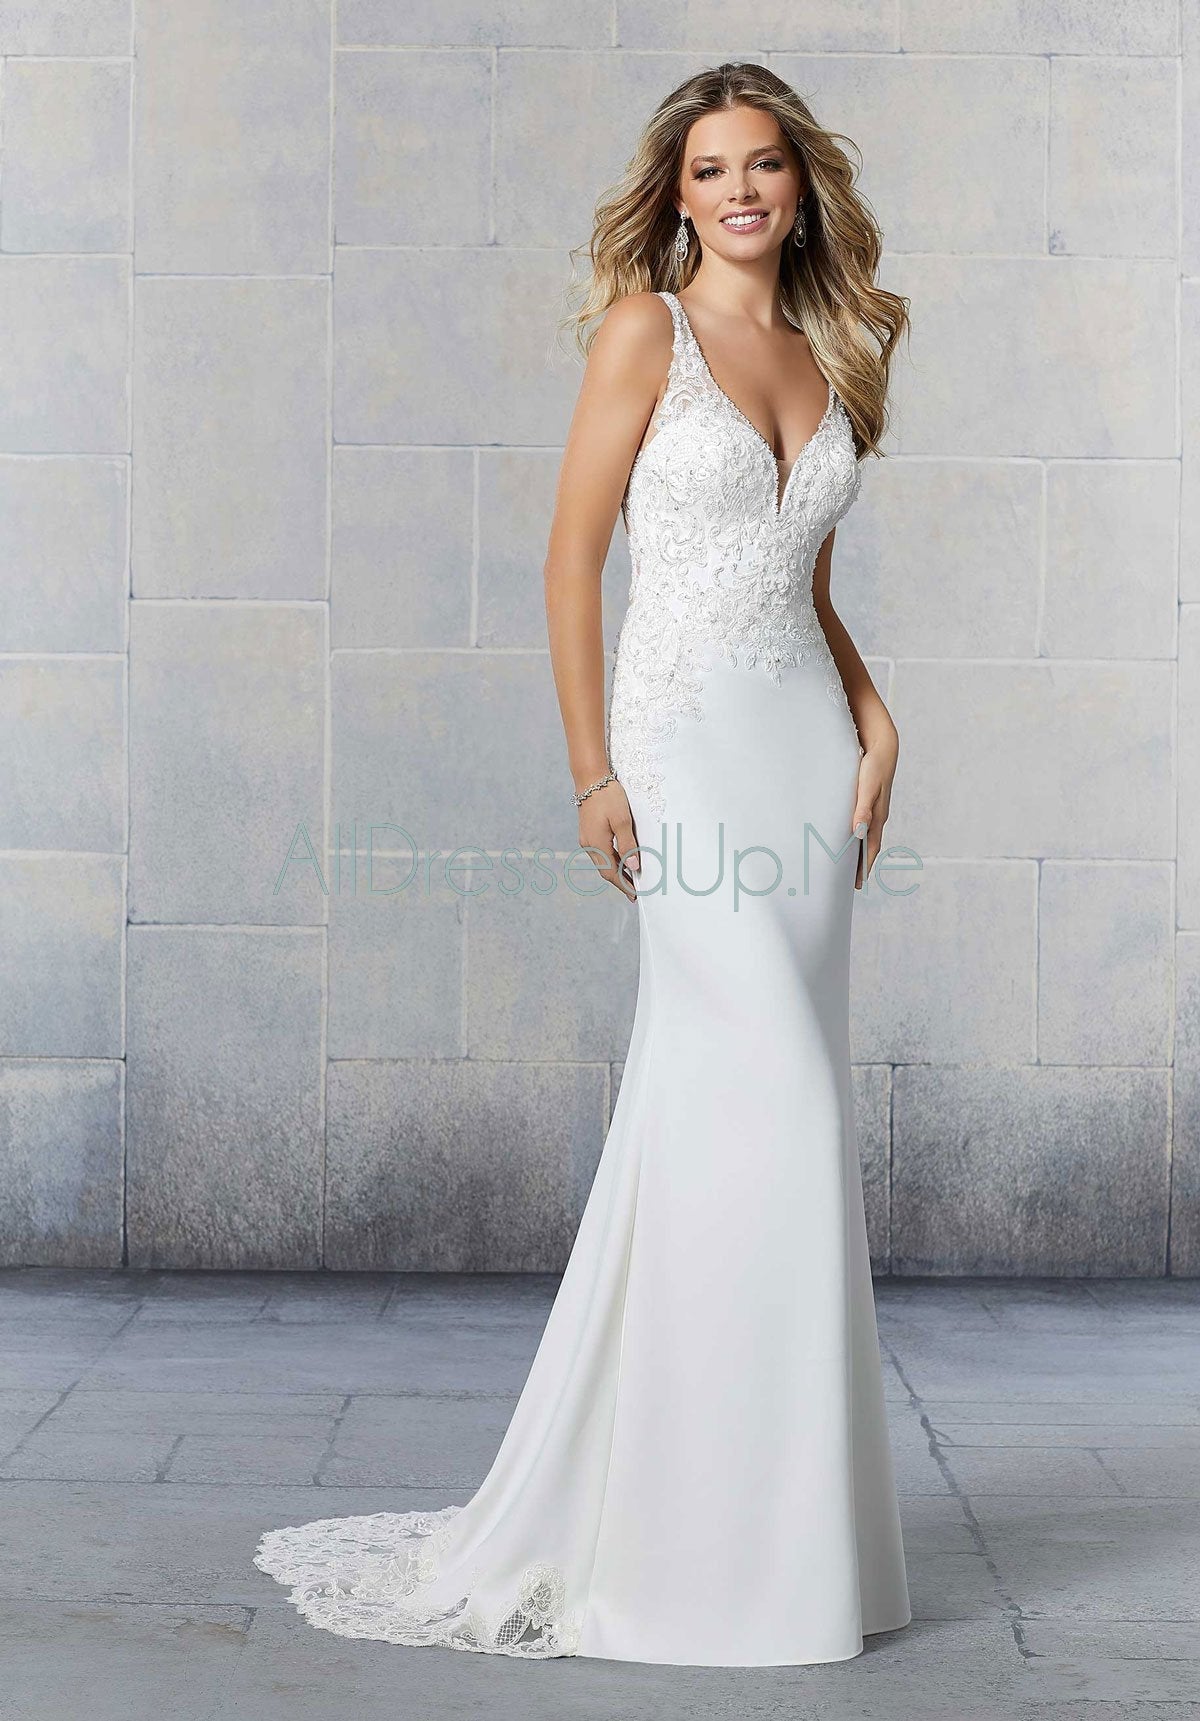 Last Dress In Store; Size: 10, Color: Ivory | Voyage - Shea - 6925 - Cheron's Bridal & All Dressed Up Prom - 10 - Wedding Gowns Dresses Chattanooga Hixson Shops Boutiques Tennessee TN Georgia GA MSRP Lowest Prices Sale Discount